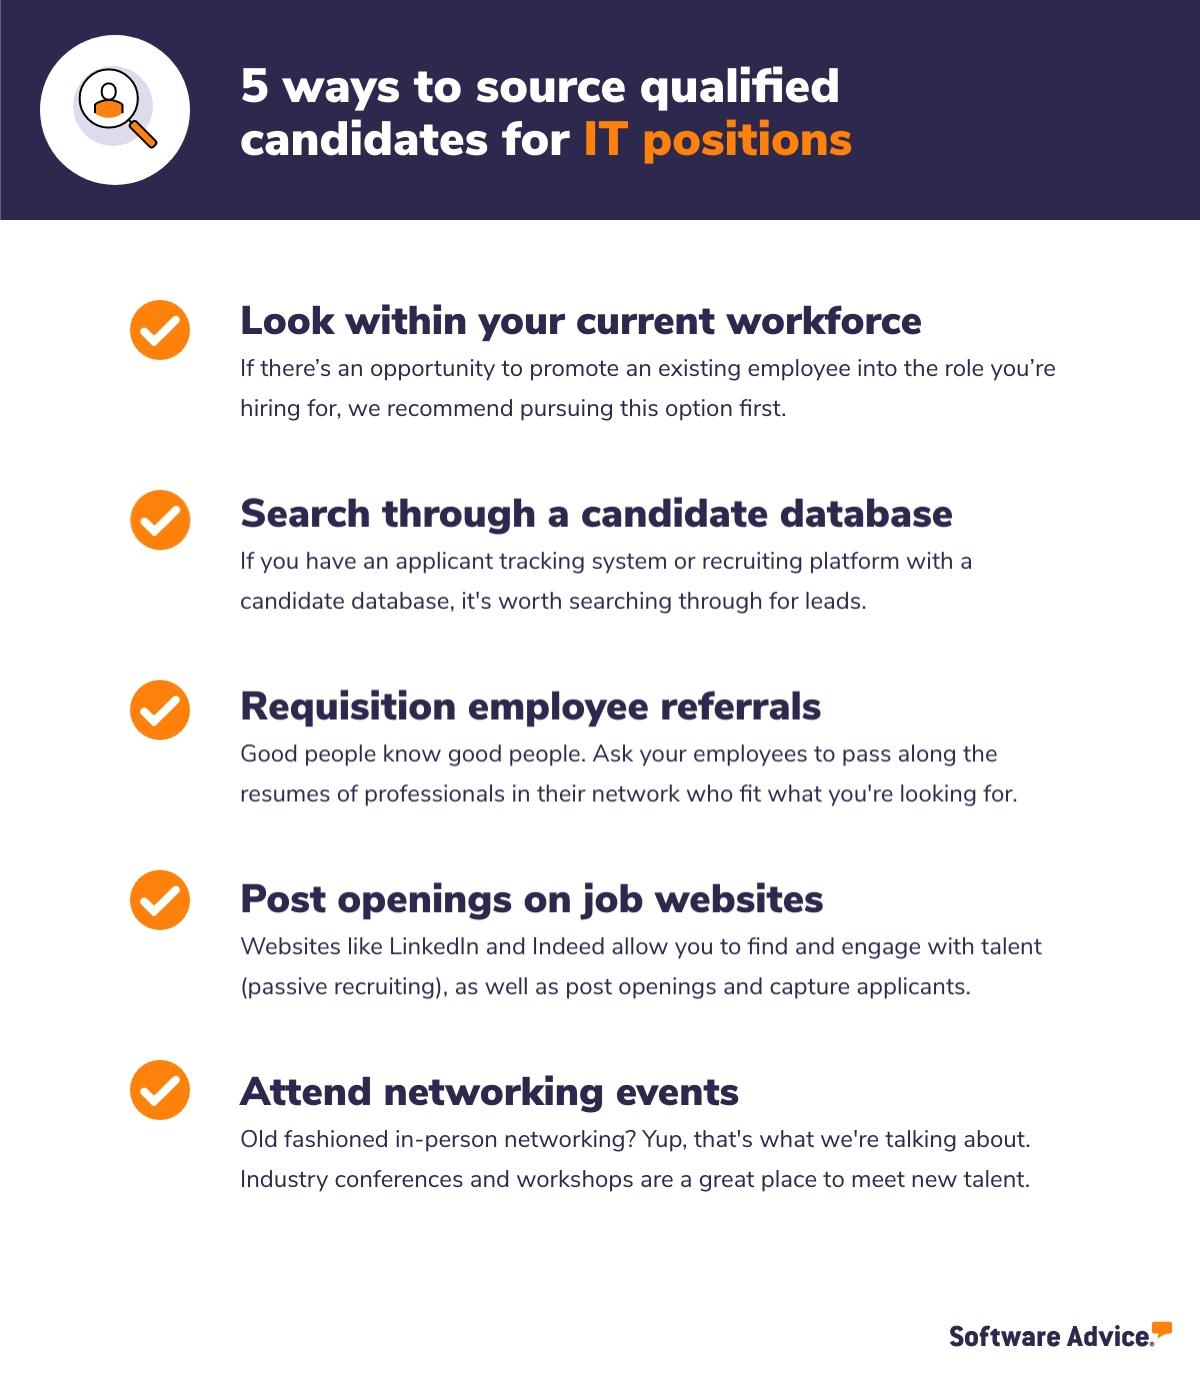 5 ways to source qualified candidates for IT positions